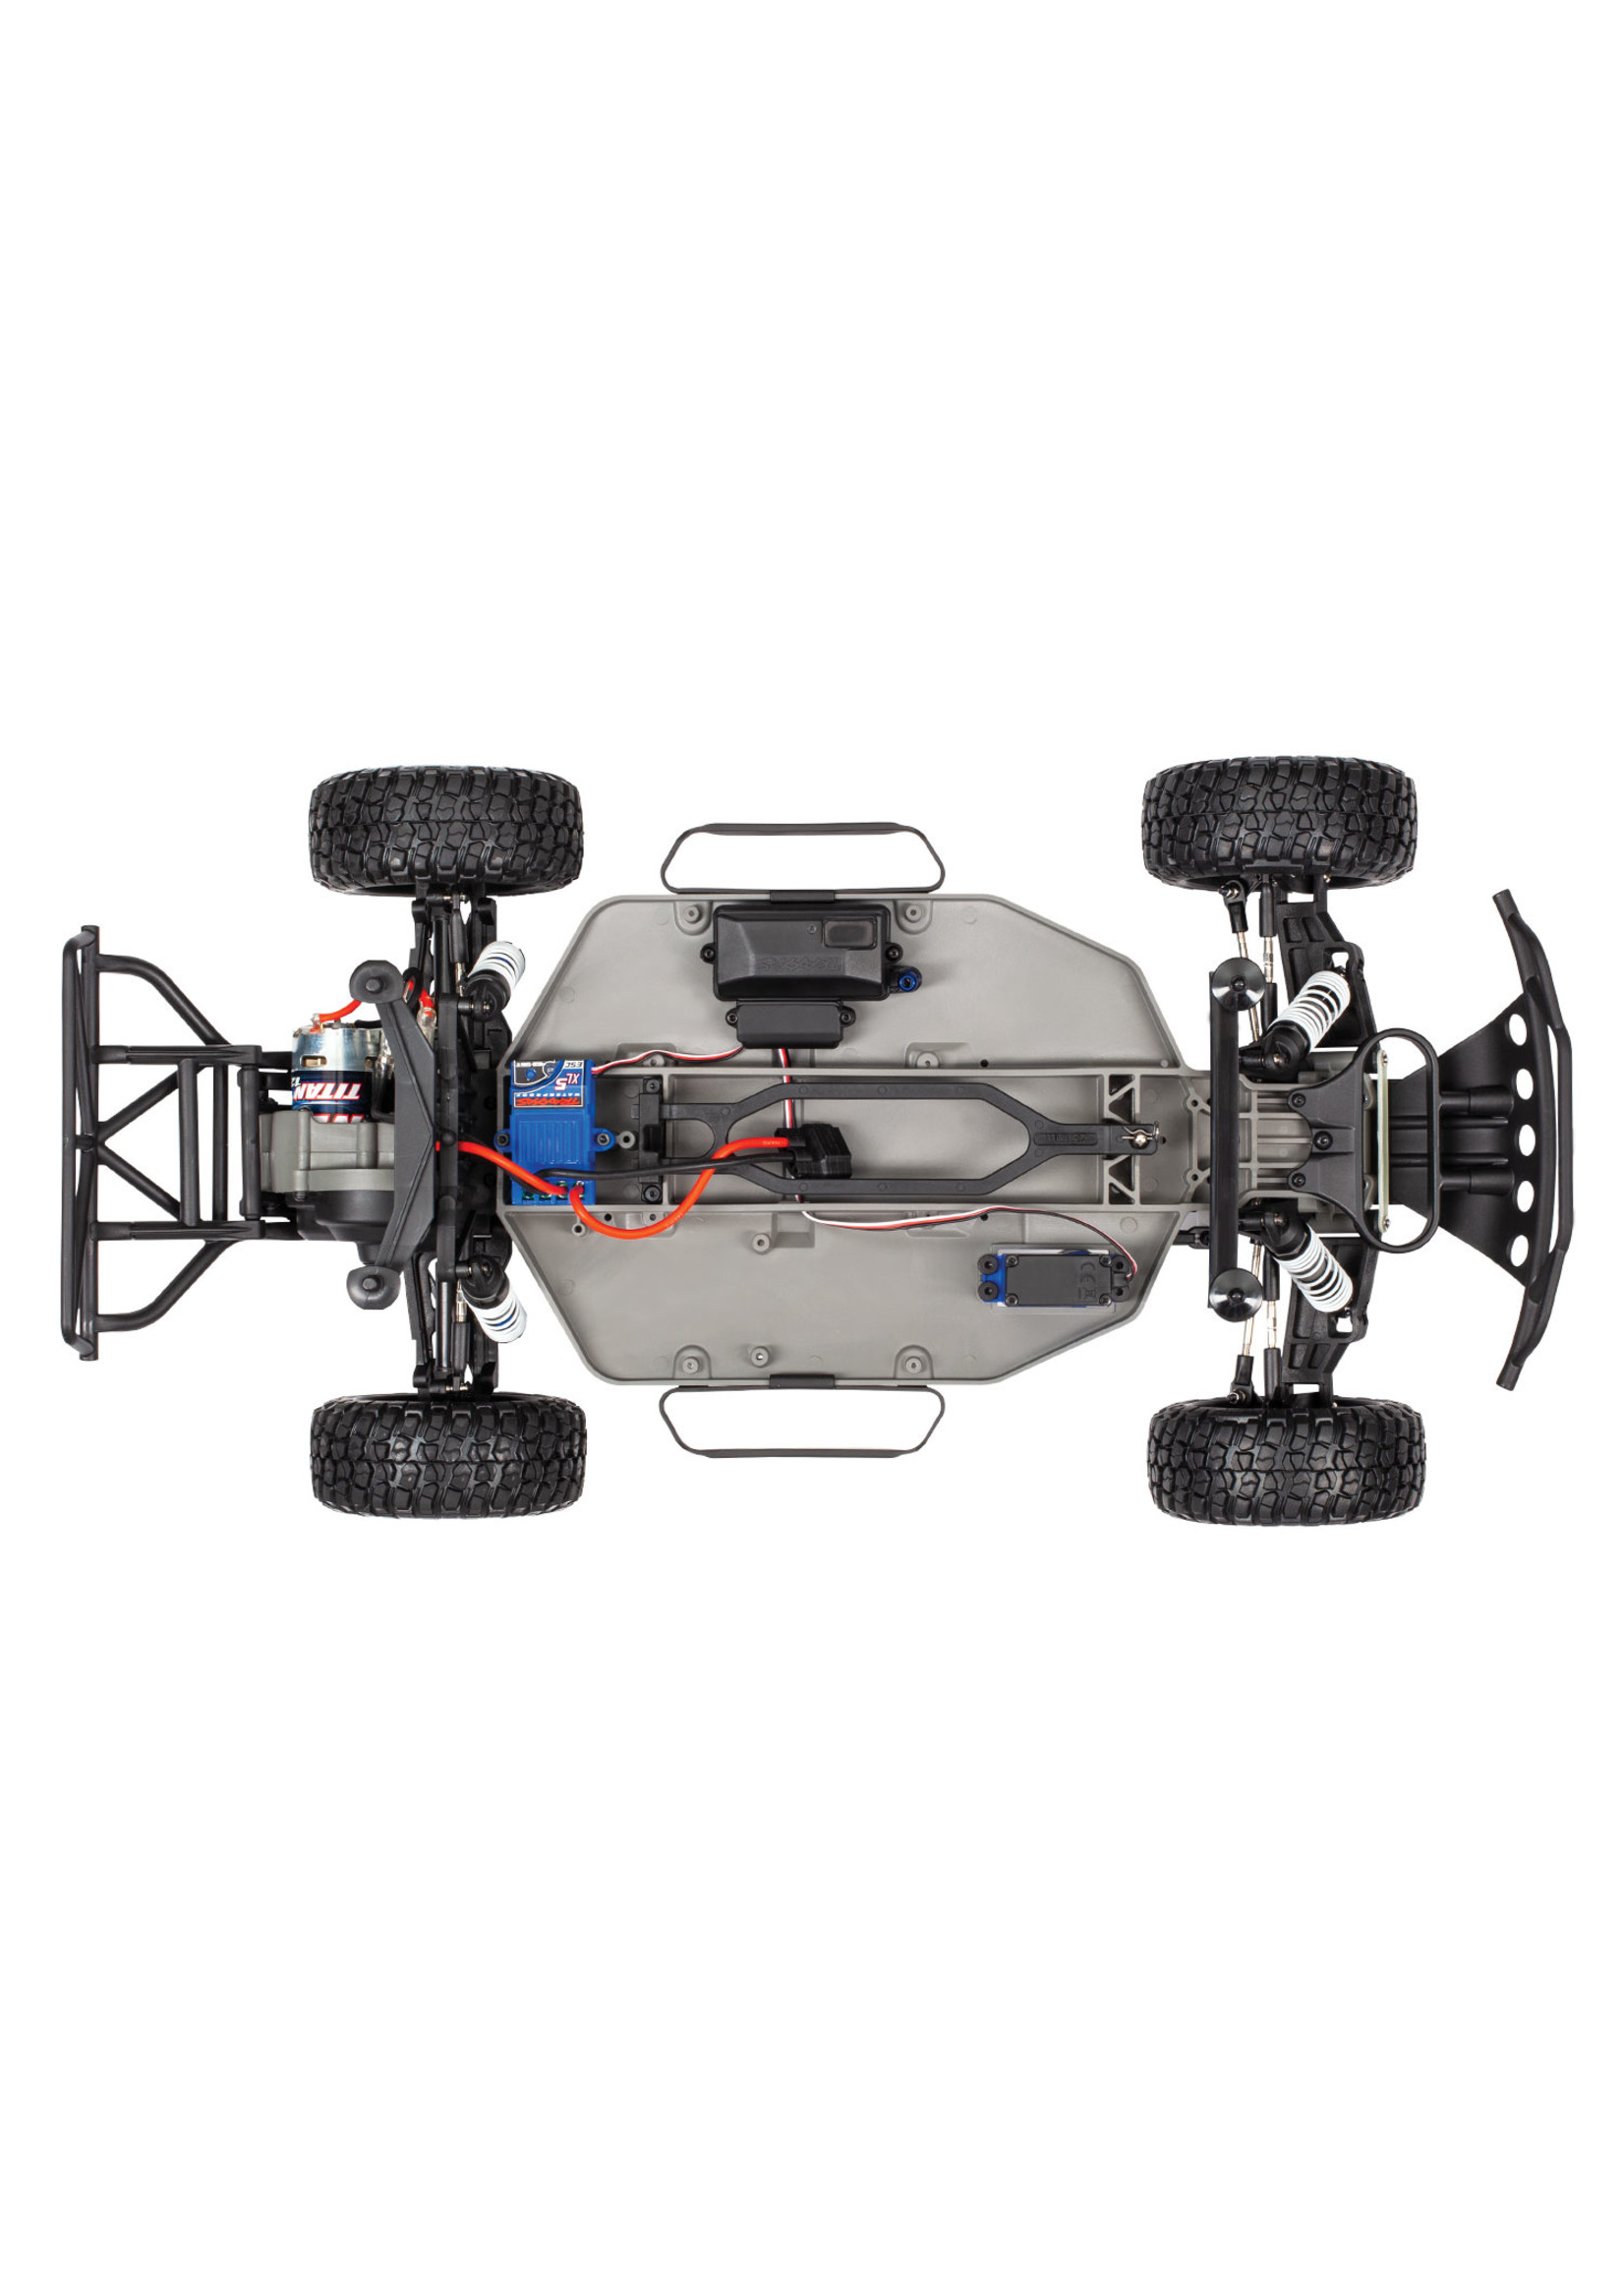 Traxxas TRA58014-4 Traxxas Slash 2WD Unassembled Kit: 1/10-scale 2WD Short Course Racing Truck with TQ 2.4GHz radio system